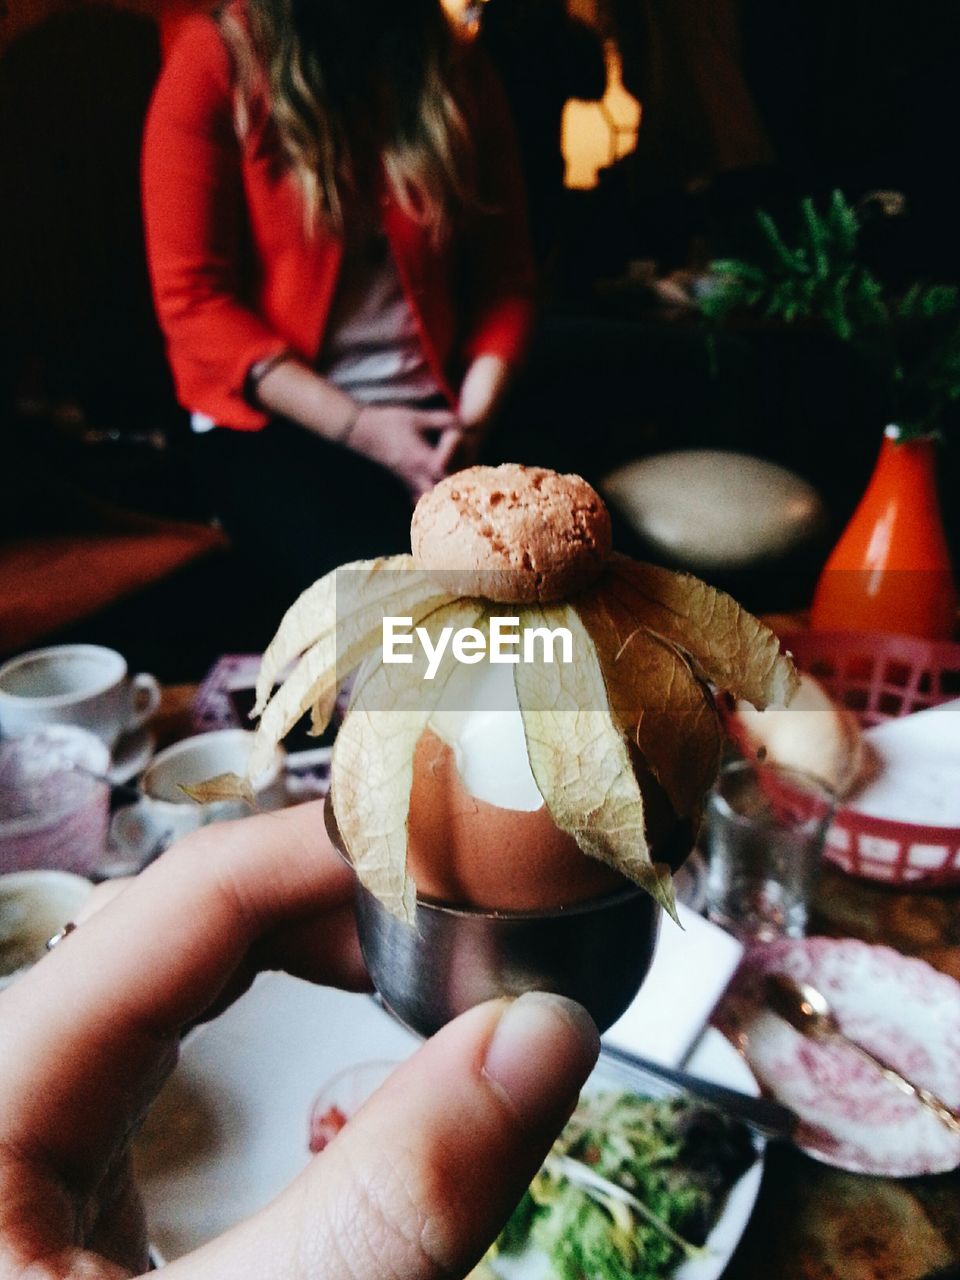 Cropped image of woman holding egg and cookie in restaurant